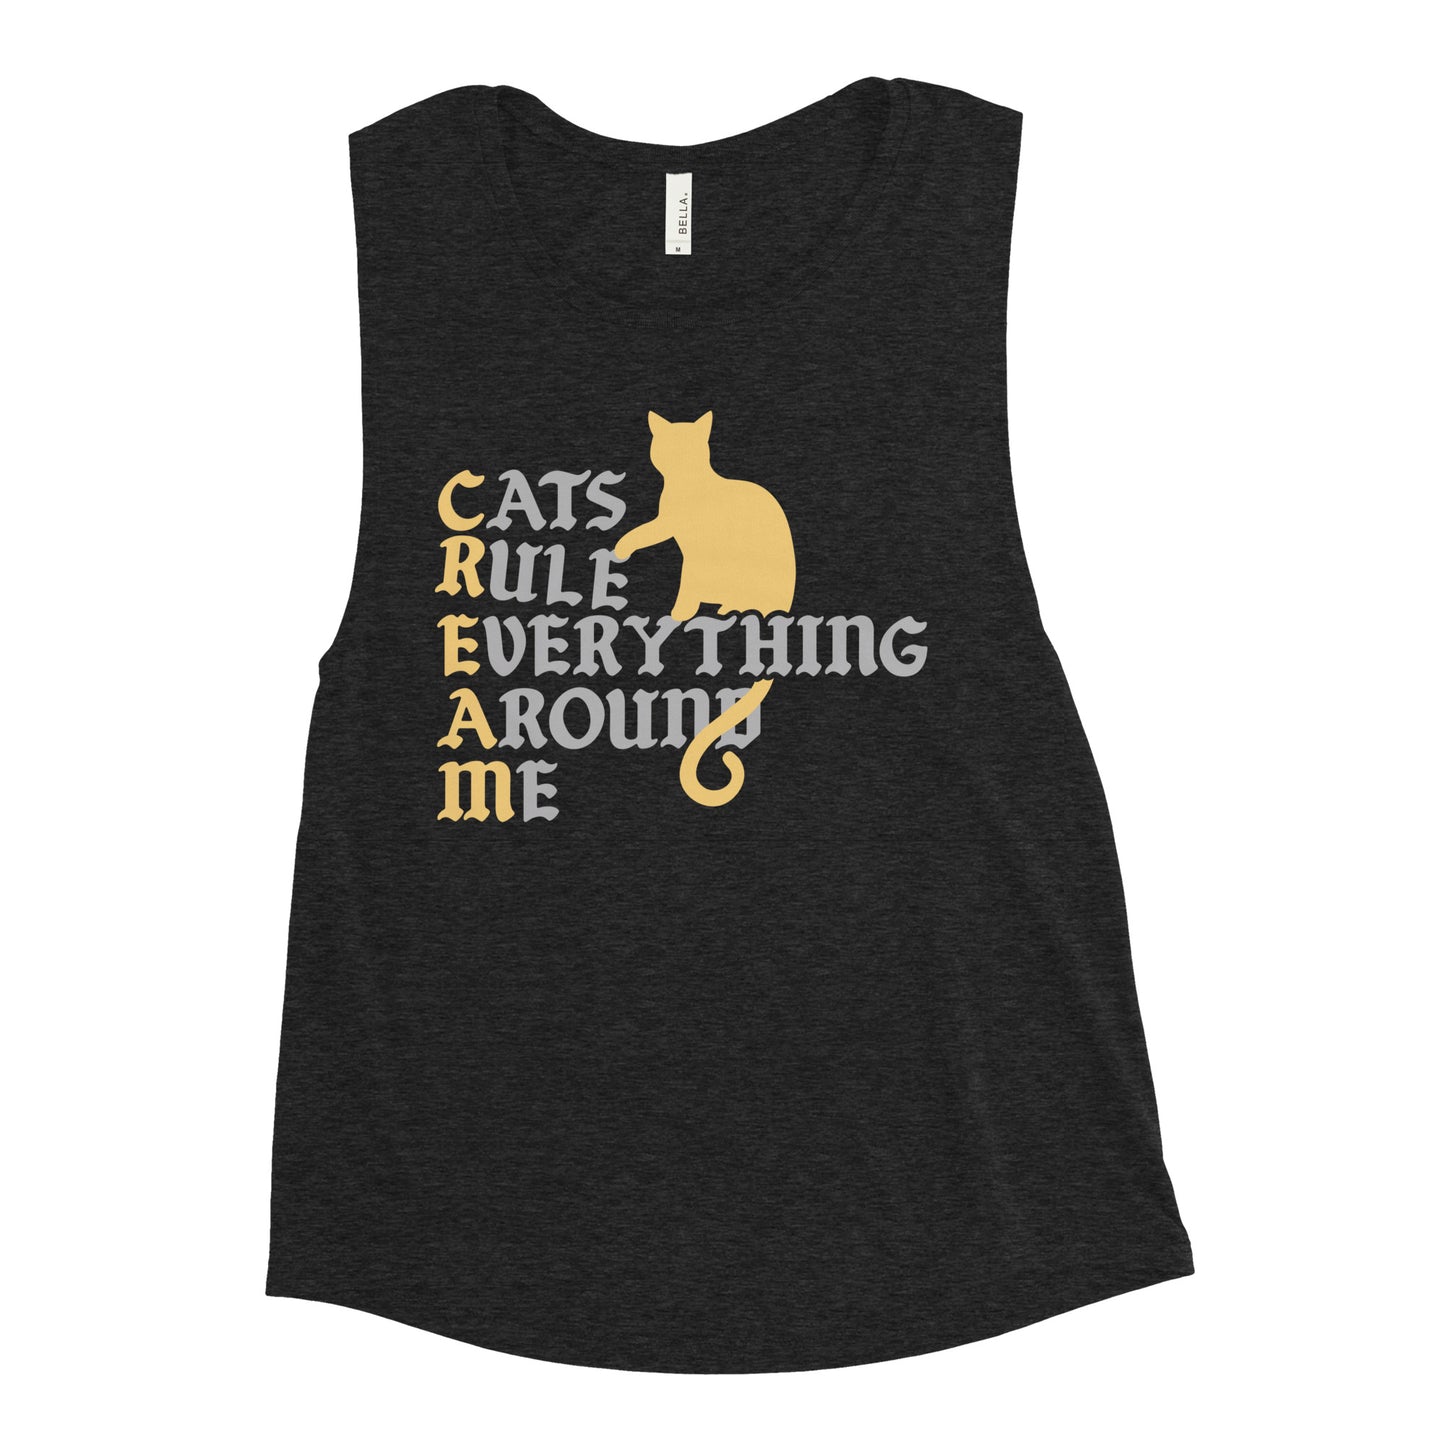 Cats Rule Everything Around Me Women's Muscle Tank